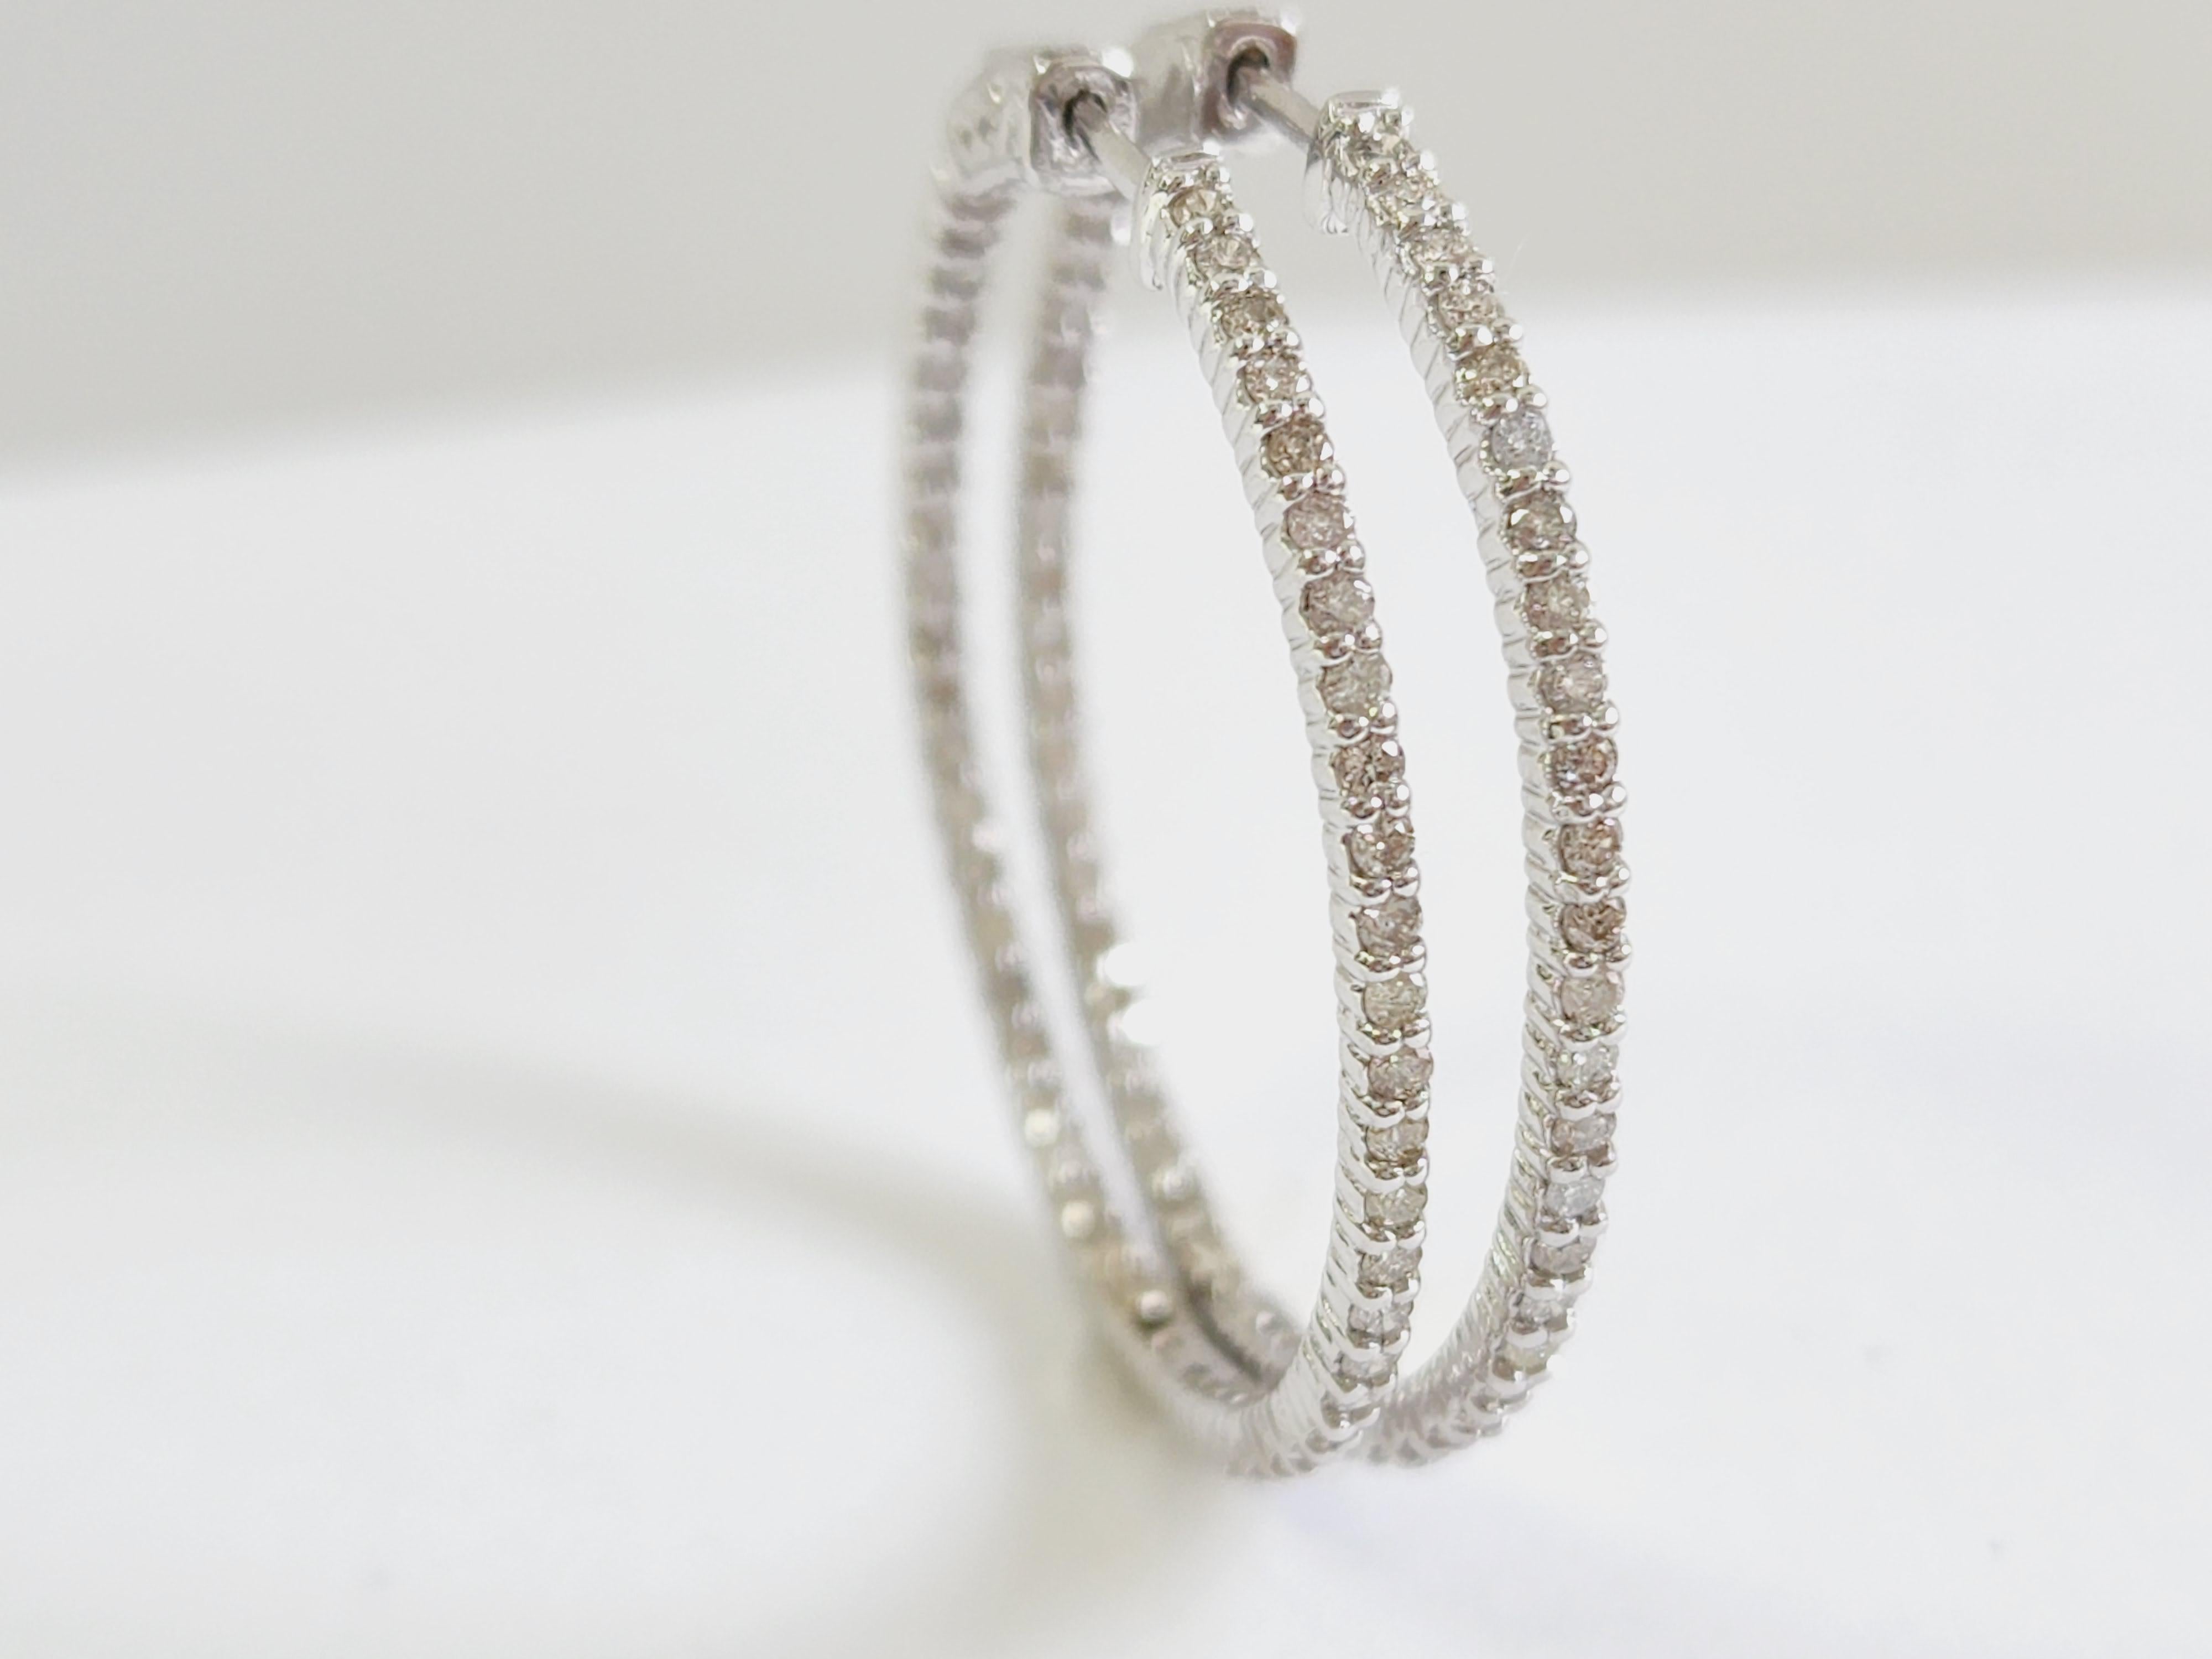 Beautiful pair of diamond inside out hoop earrings in 14k white gold. Secures with snap closure for wear. 
Measures 1.25 inch x 1.25 inch diameter. 
Average H Color, SI Clarity

*Free shipping within the U.S*